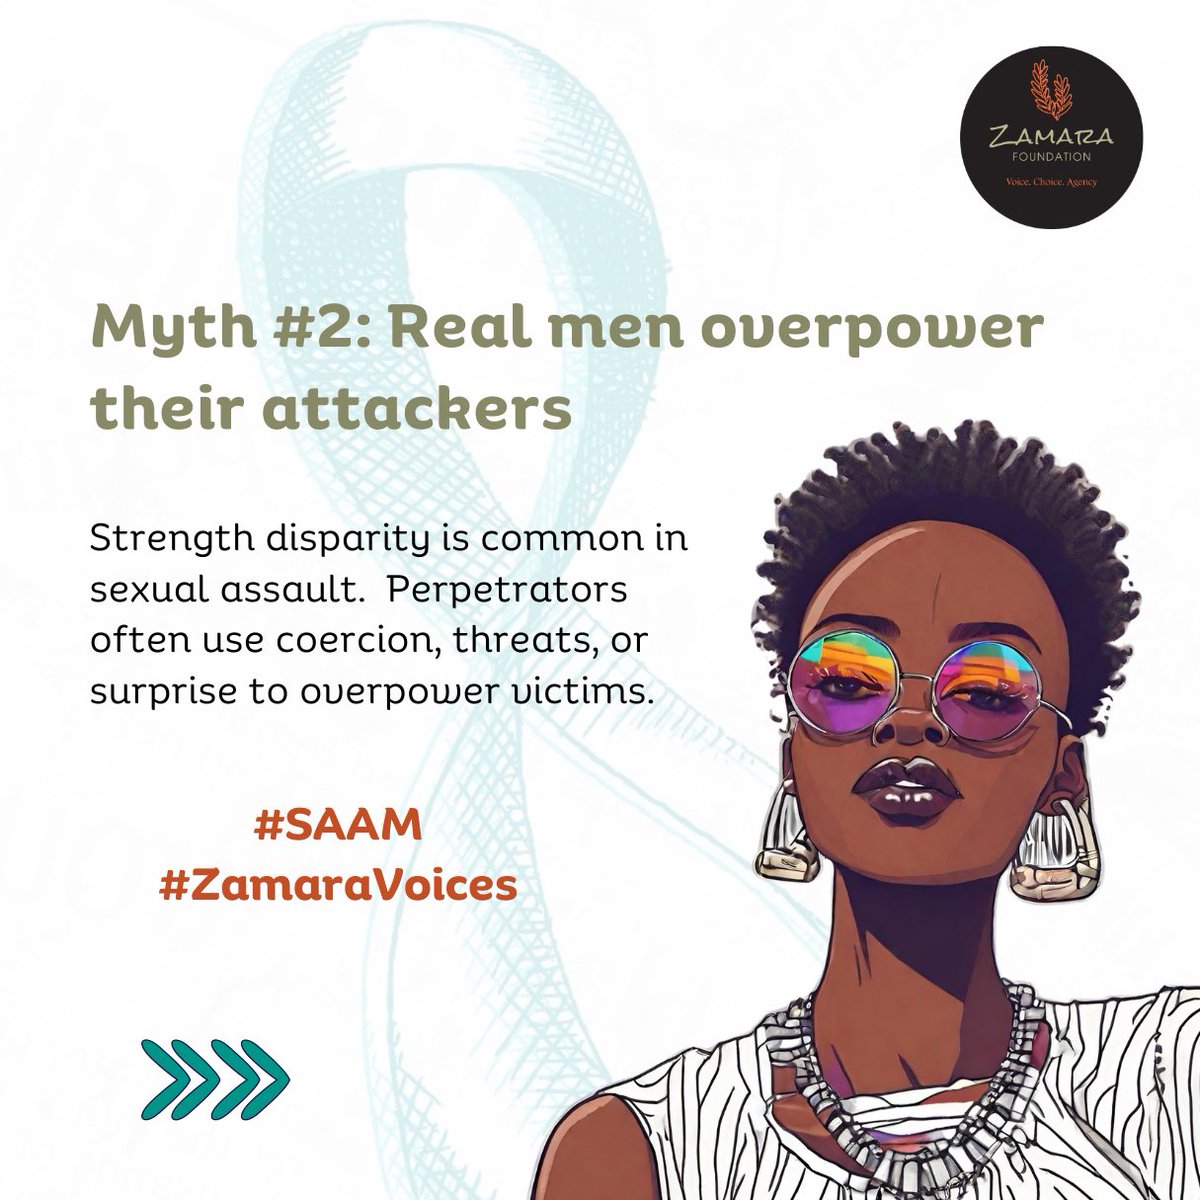 Myth #2: Real men overpower their attackers Strength disparity is common in sexual assault. Perpetrators often use coercion, threats, or surprise to overpower victims. #SAAM #ZamaraVoices